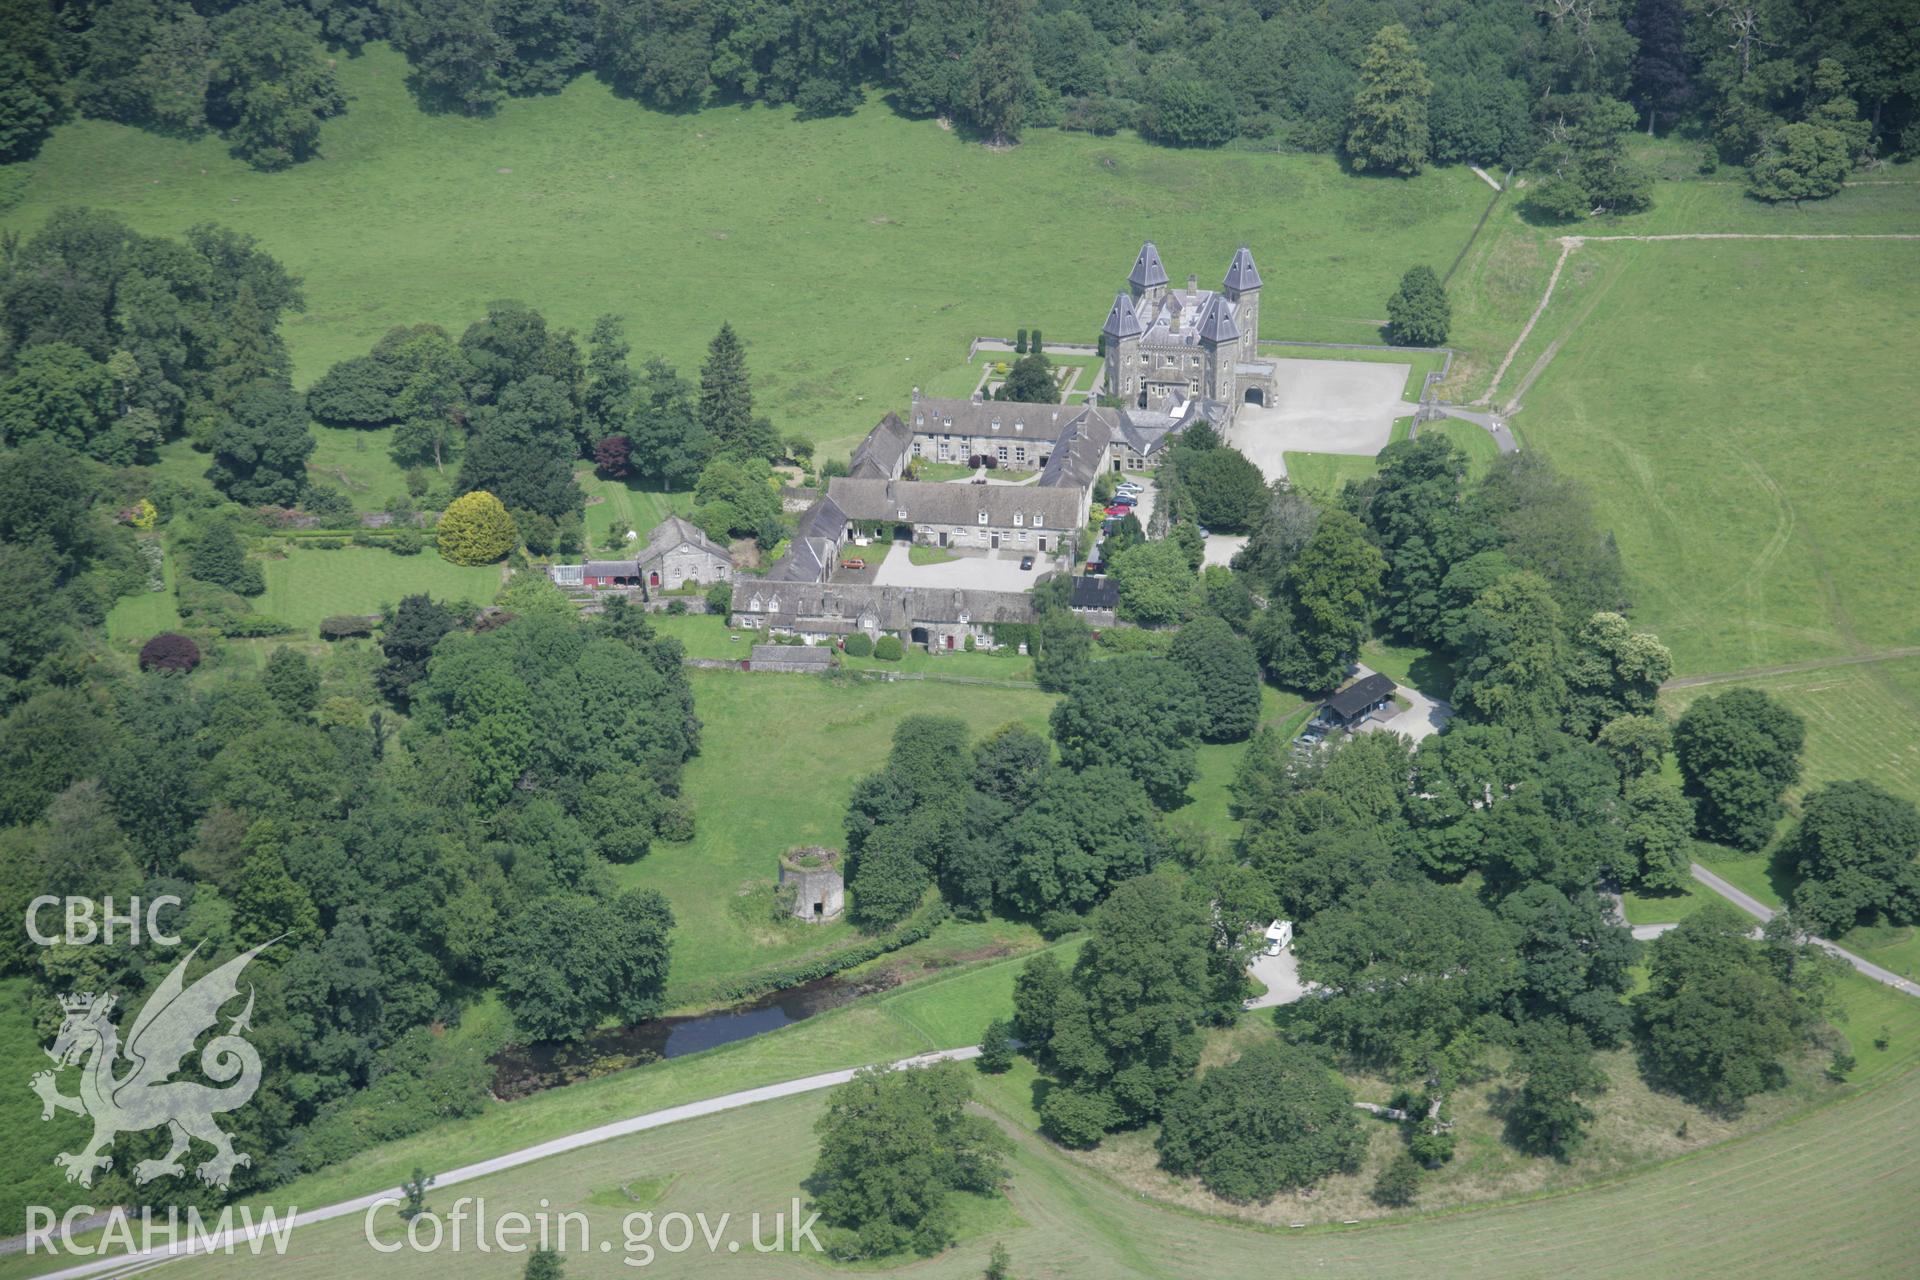 RCAHMW colour oblique aerial photograph of Newton House, (Dinefwr Castle), Llandeilo, in general view from the south. Taken on 11 July 2005 by Toby Driver